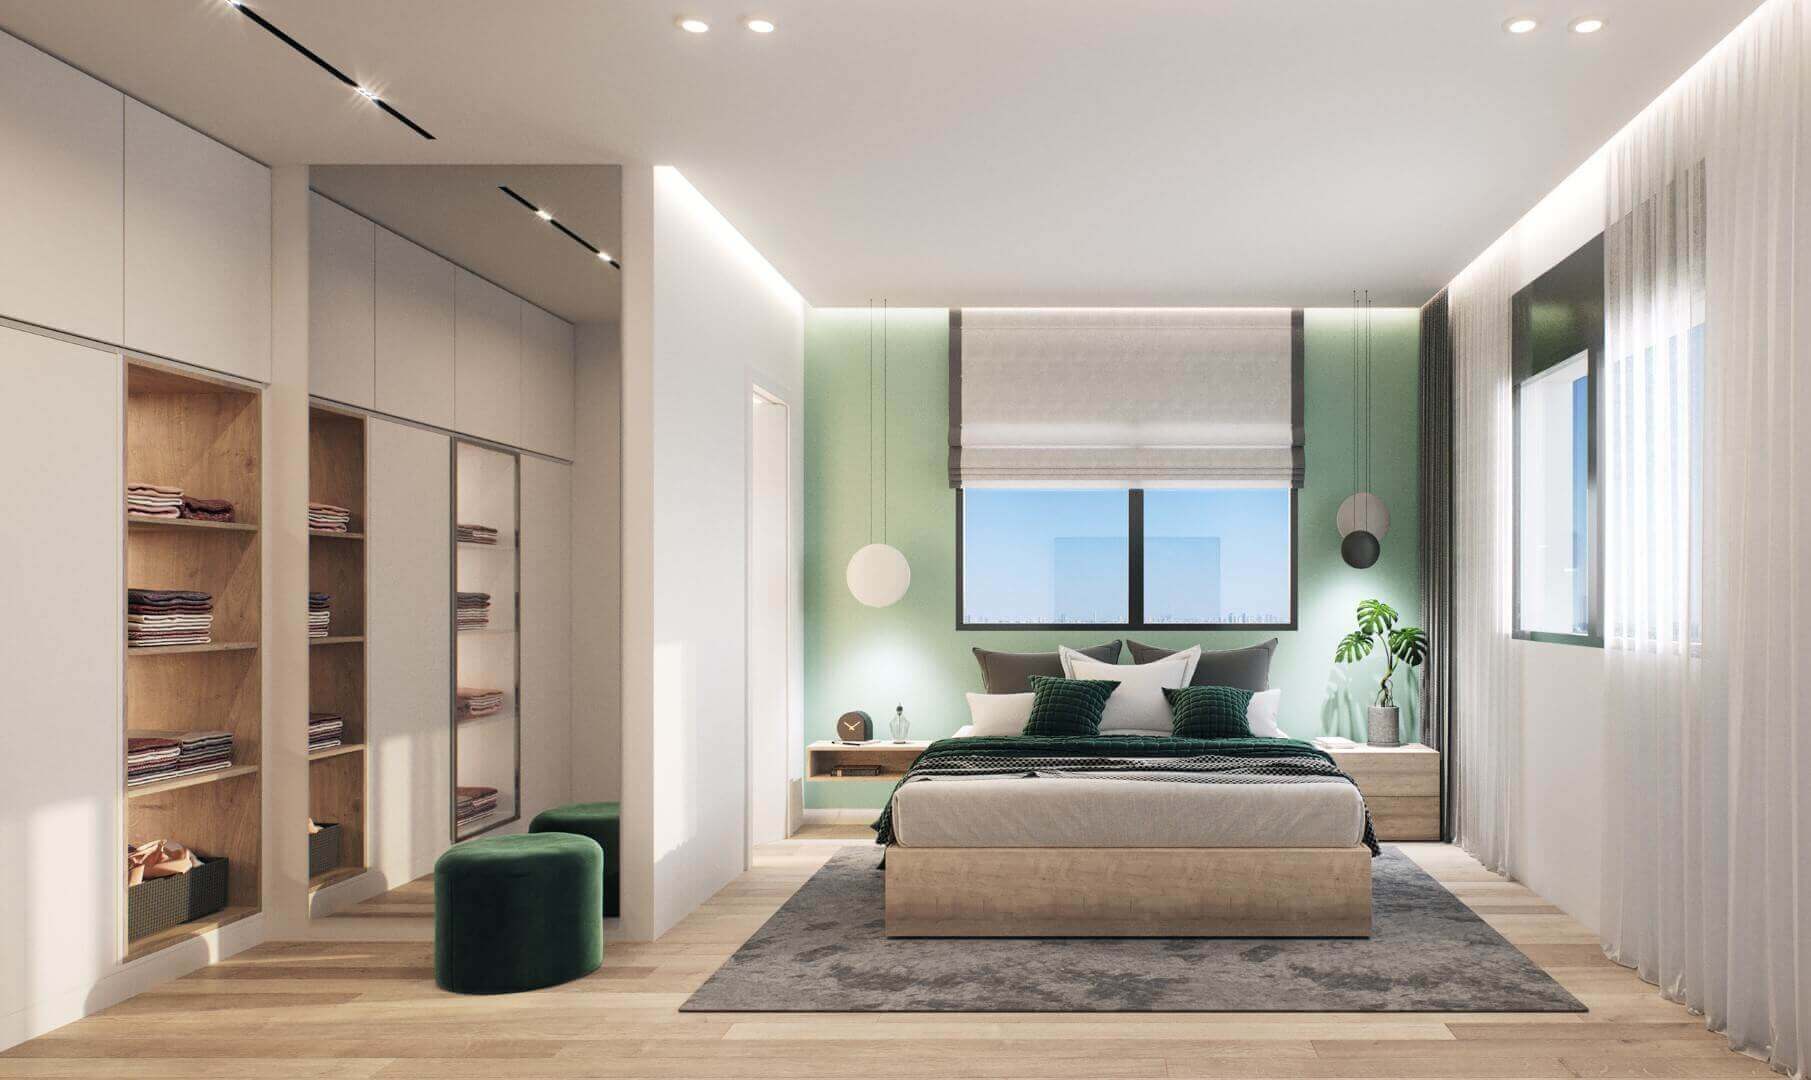 Simulation for a bedroom space in the NXT TOWERS project in Bat Yam